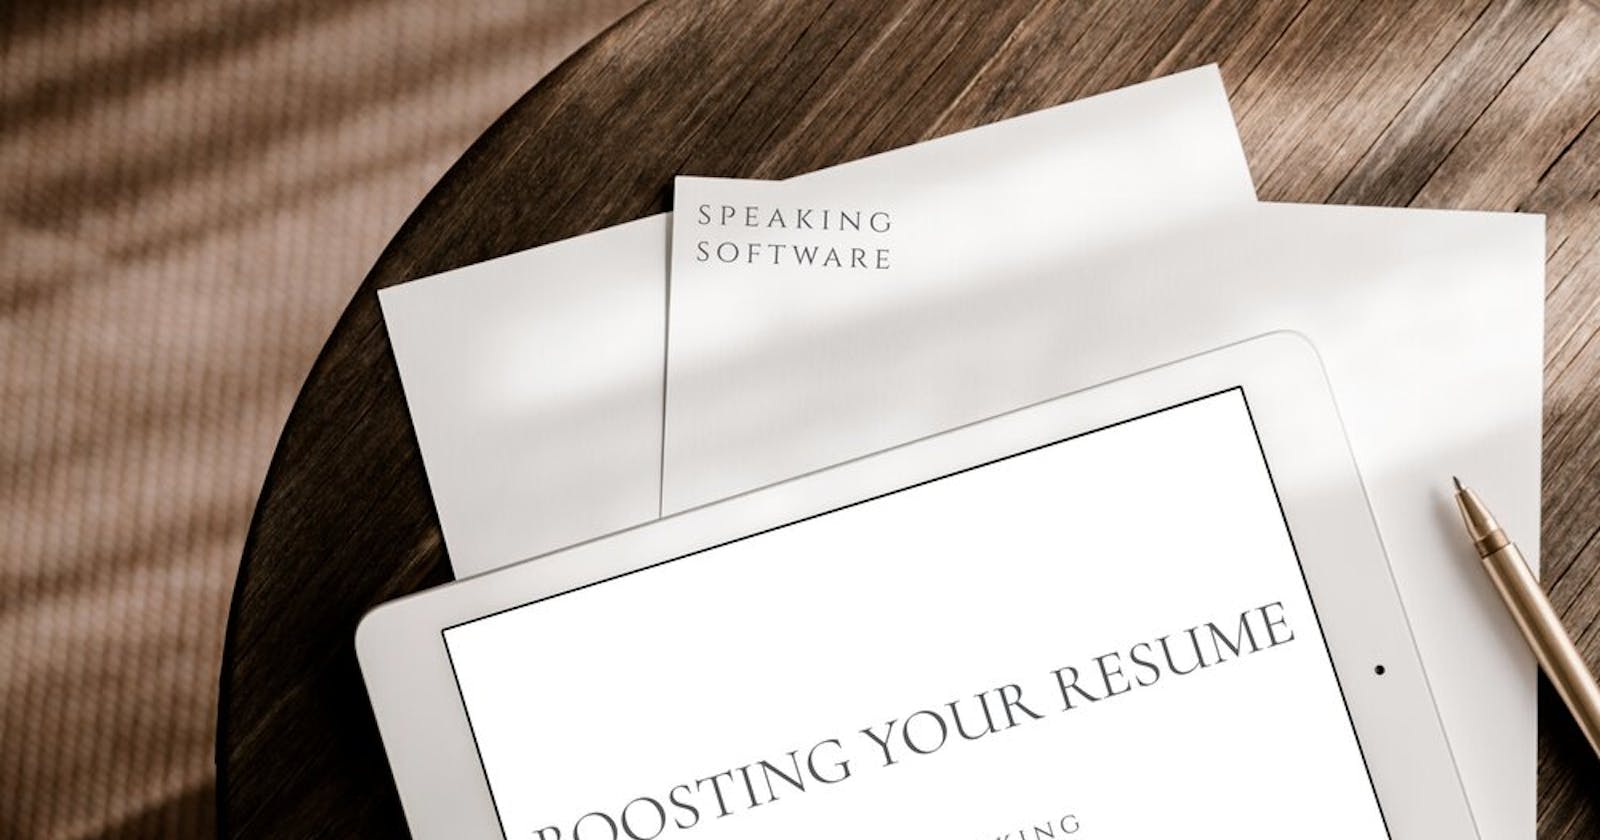 7. Boosting your Resume